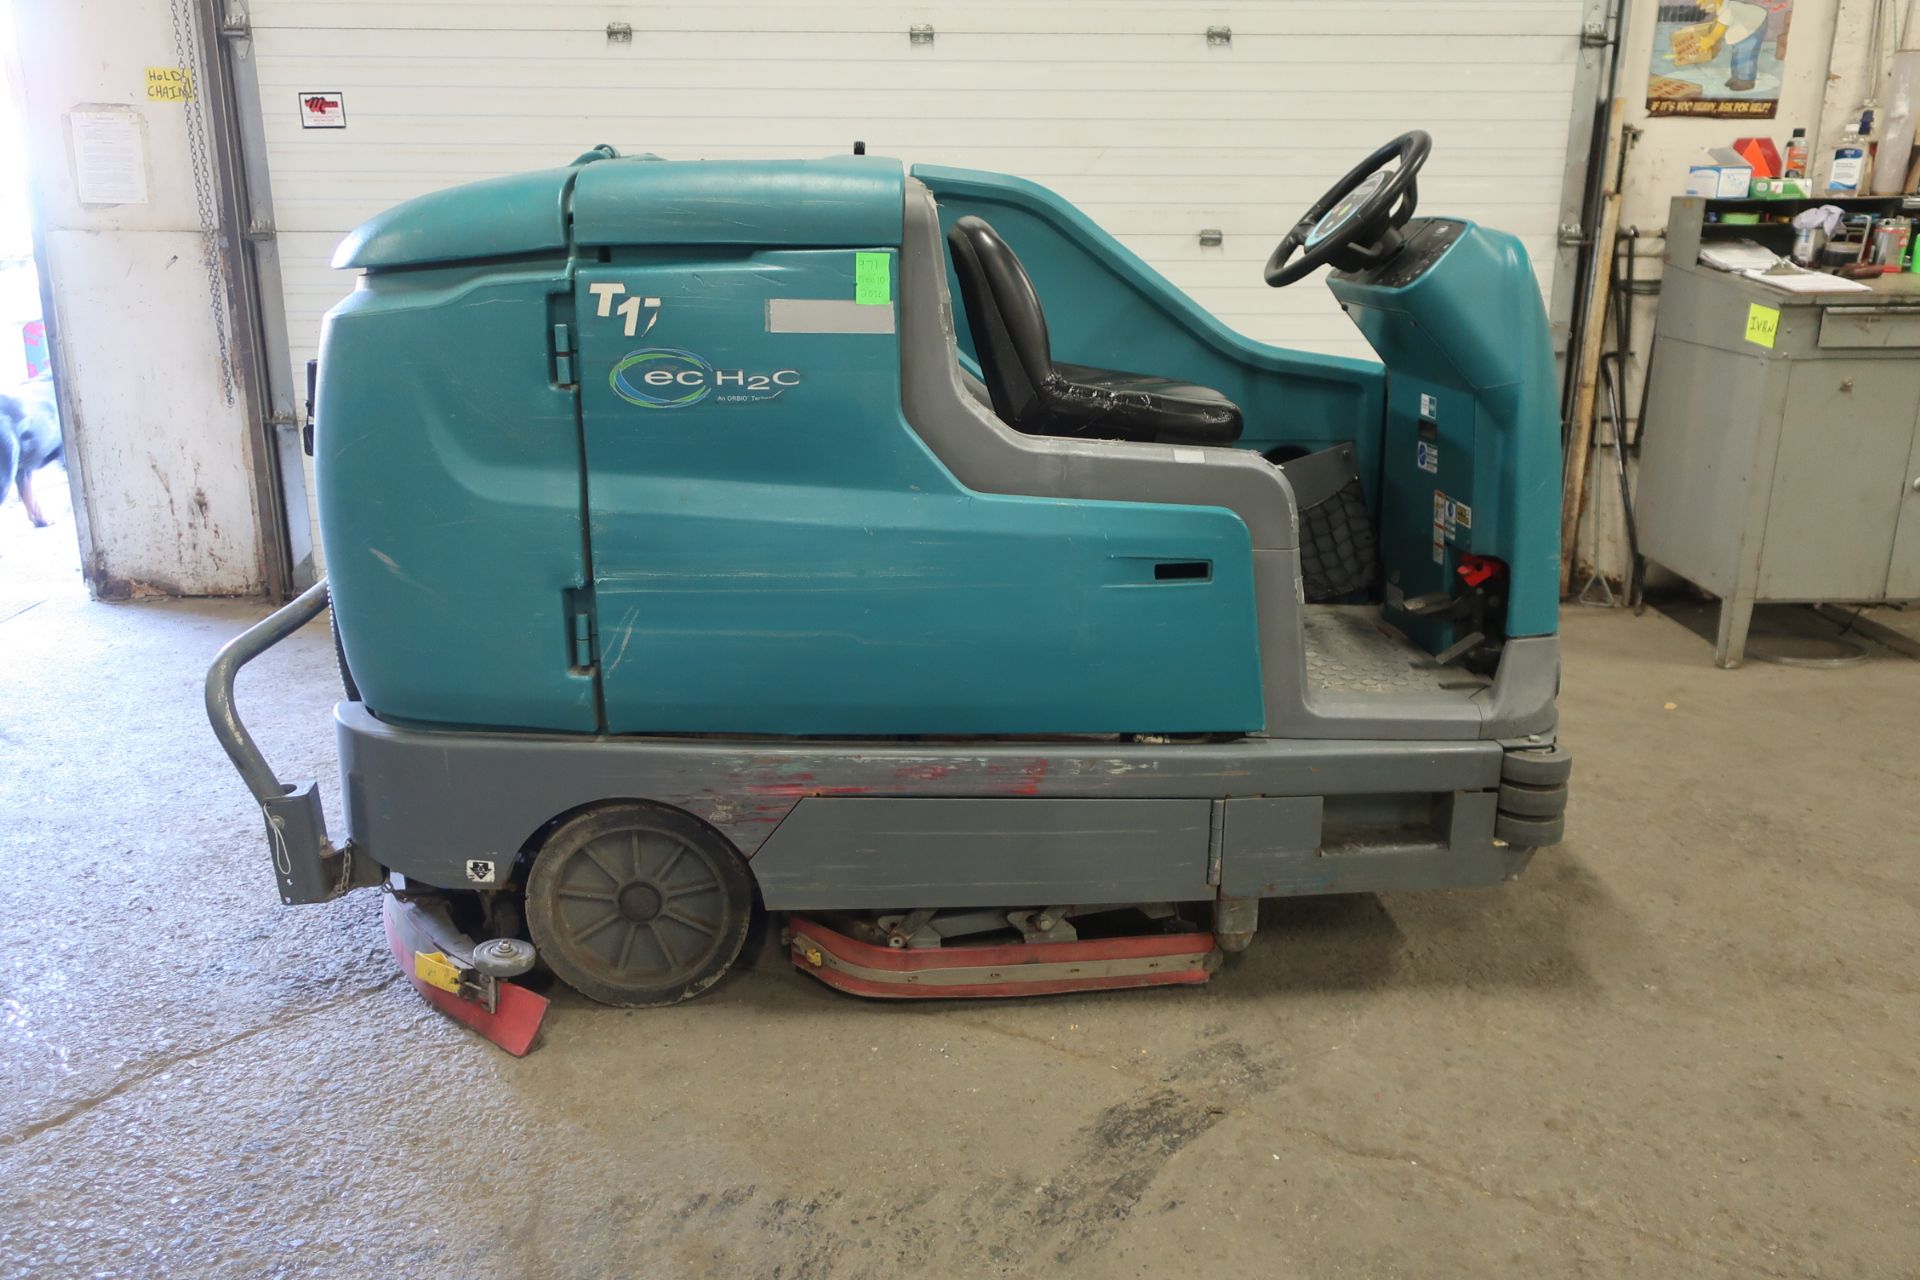 MINT 2015 Tennant T17 ECH20 Ride On Power Scrubber Sweeper Power-Operated Cleaning Machine -